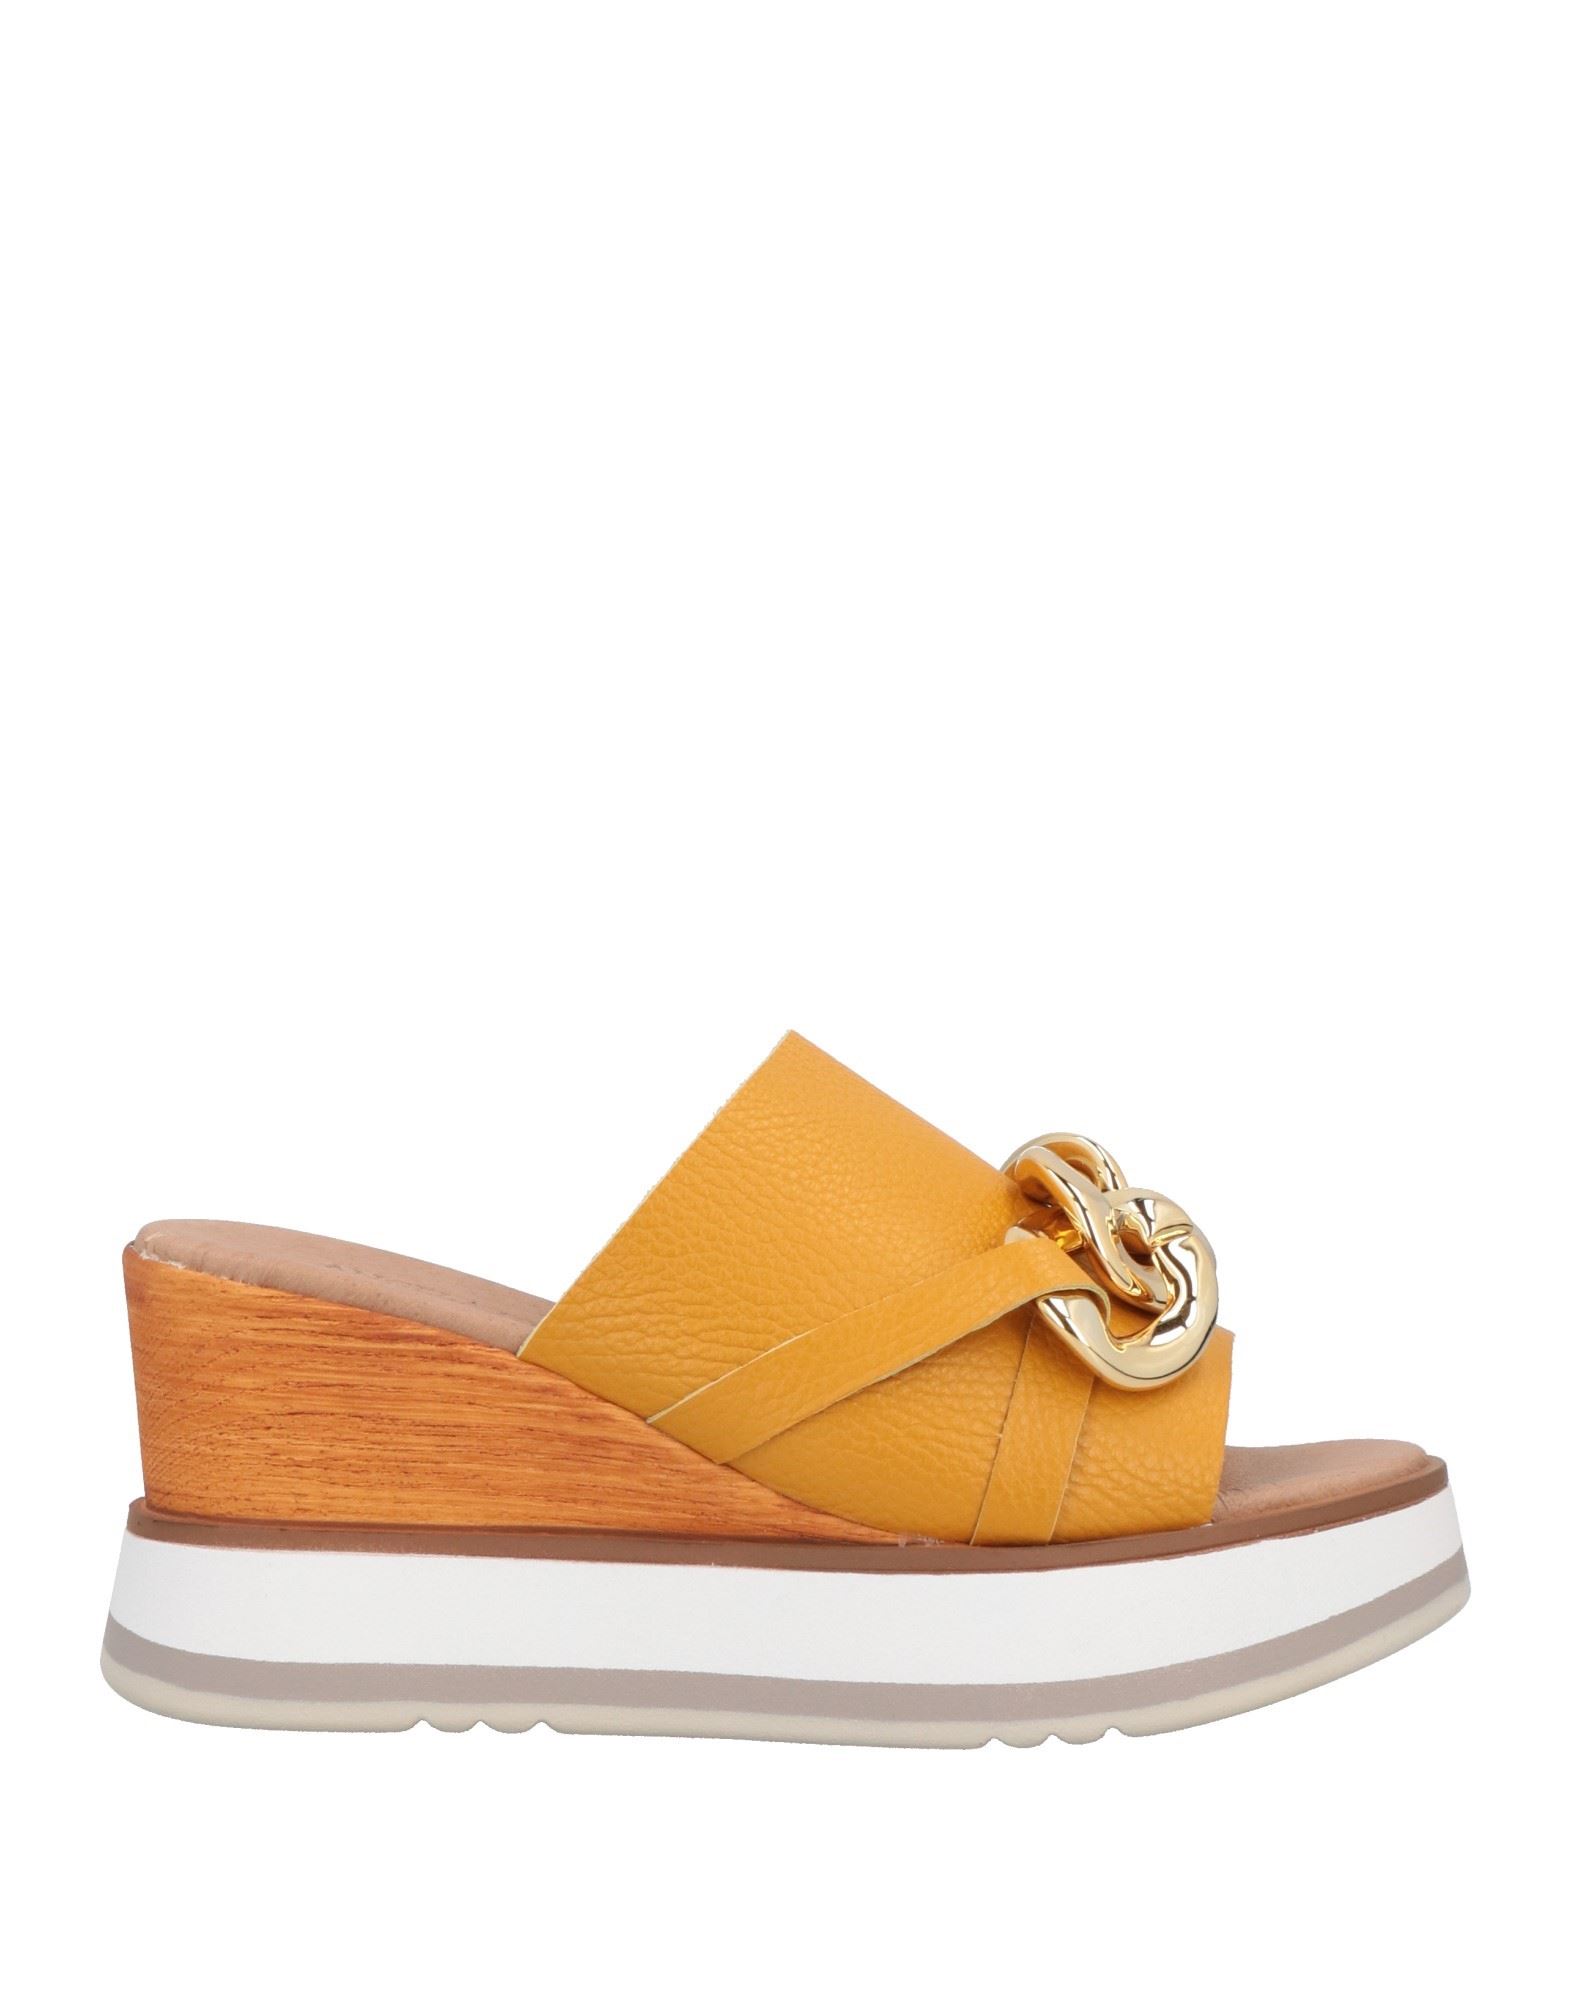 Angela George Sandals In Yellow